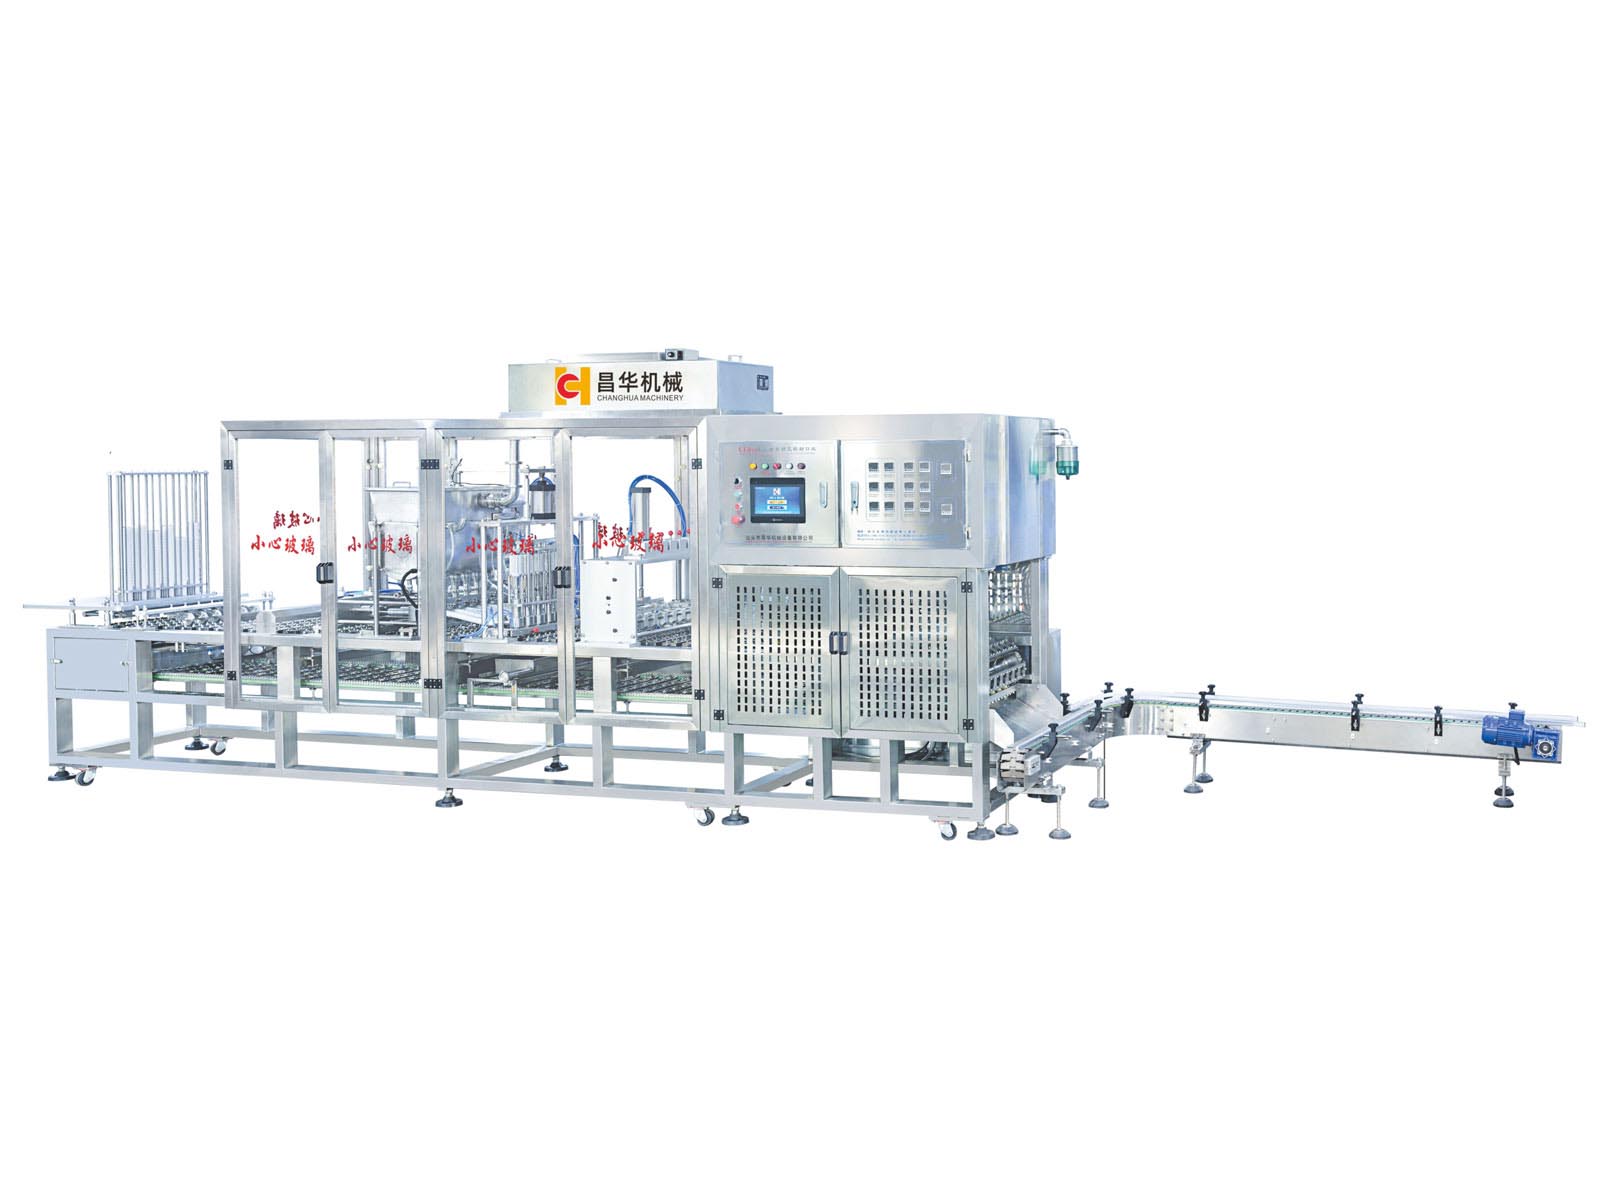  Sauce automatic flling single film sealing machine (High configuration- Servo drive, Equipped with dust cover, million air purifier)